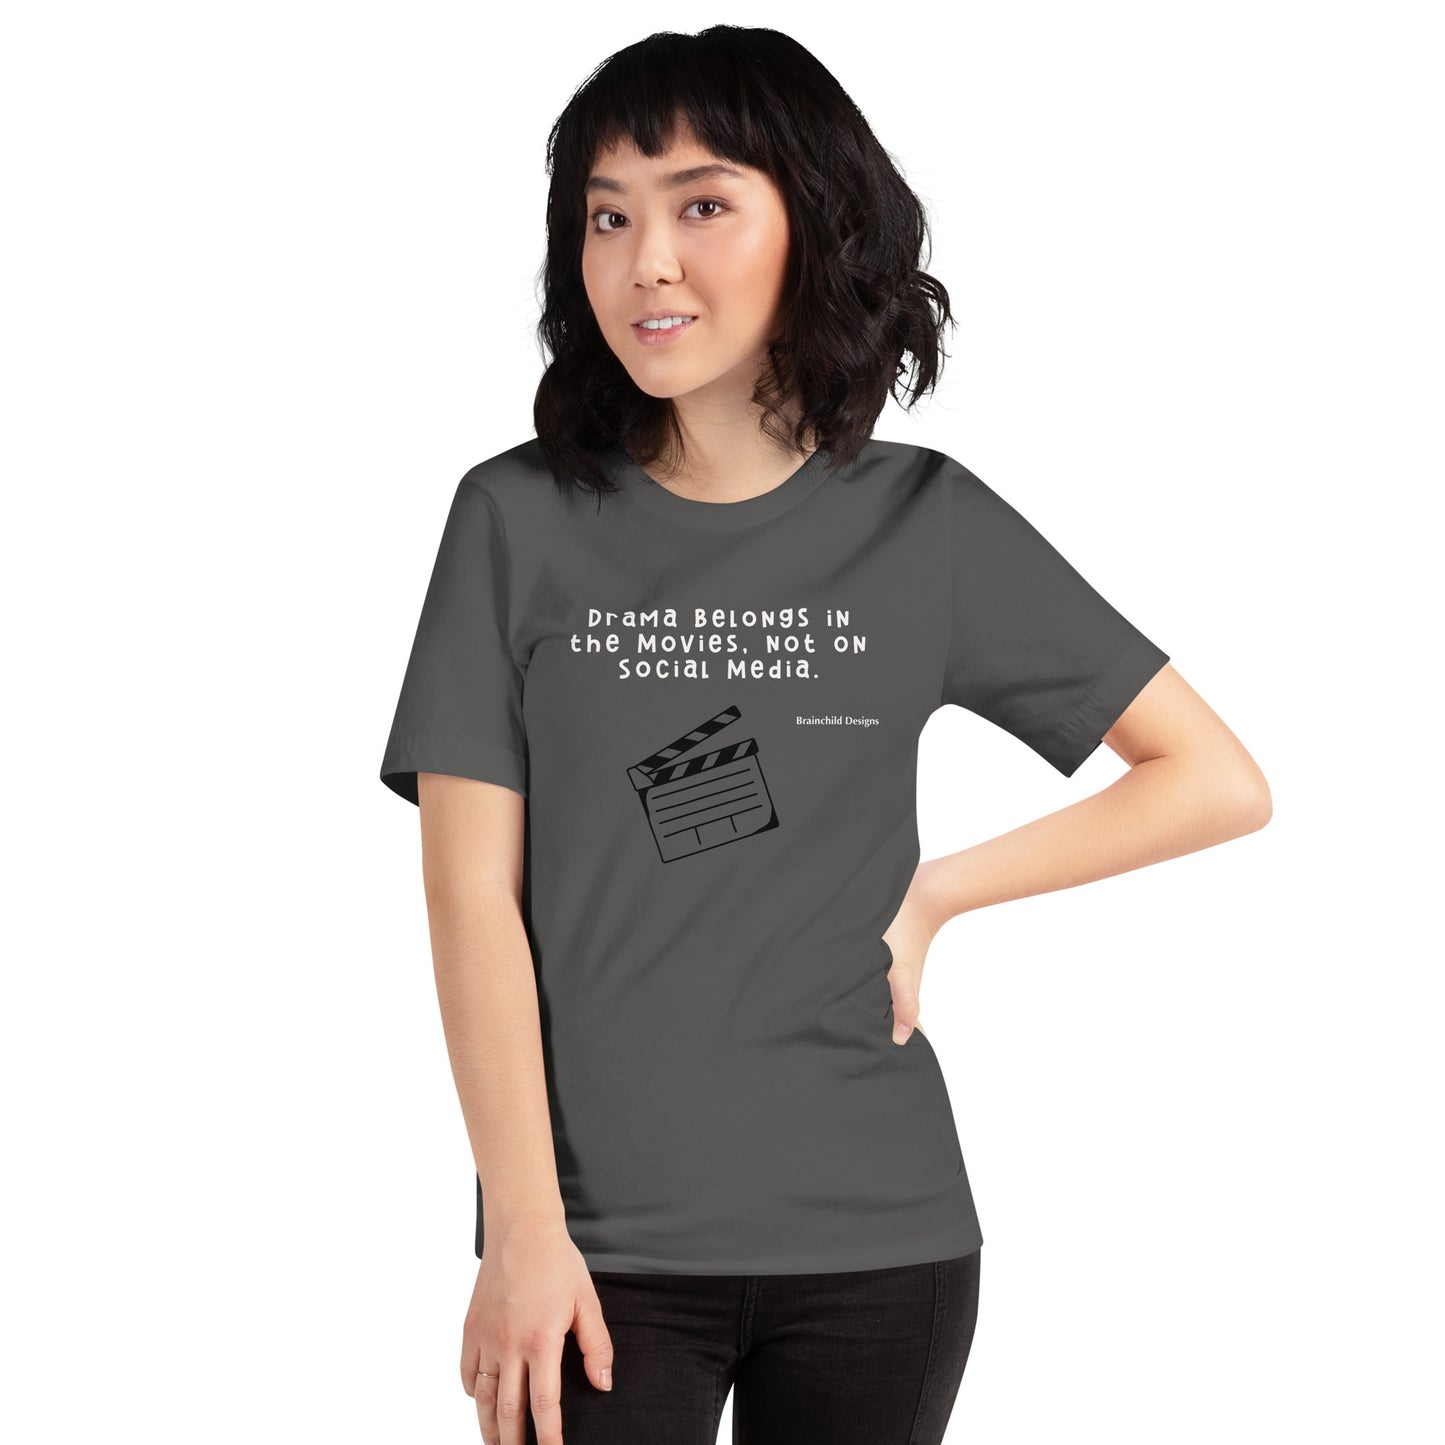 Drama Belongs in the Movies, Not on Social Media - Adult Unisex T-Shirt